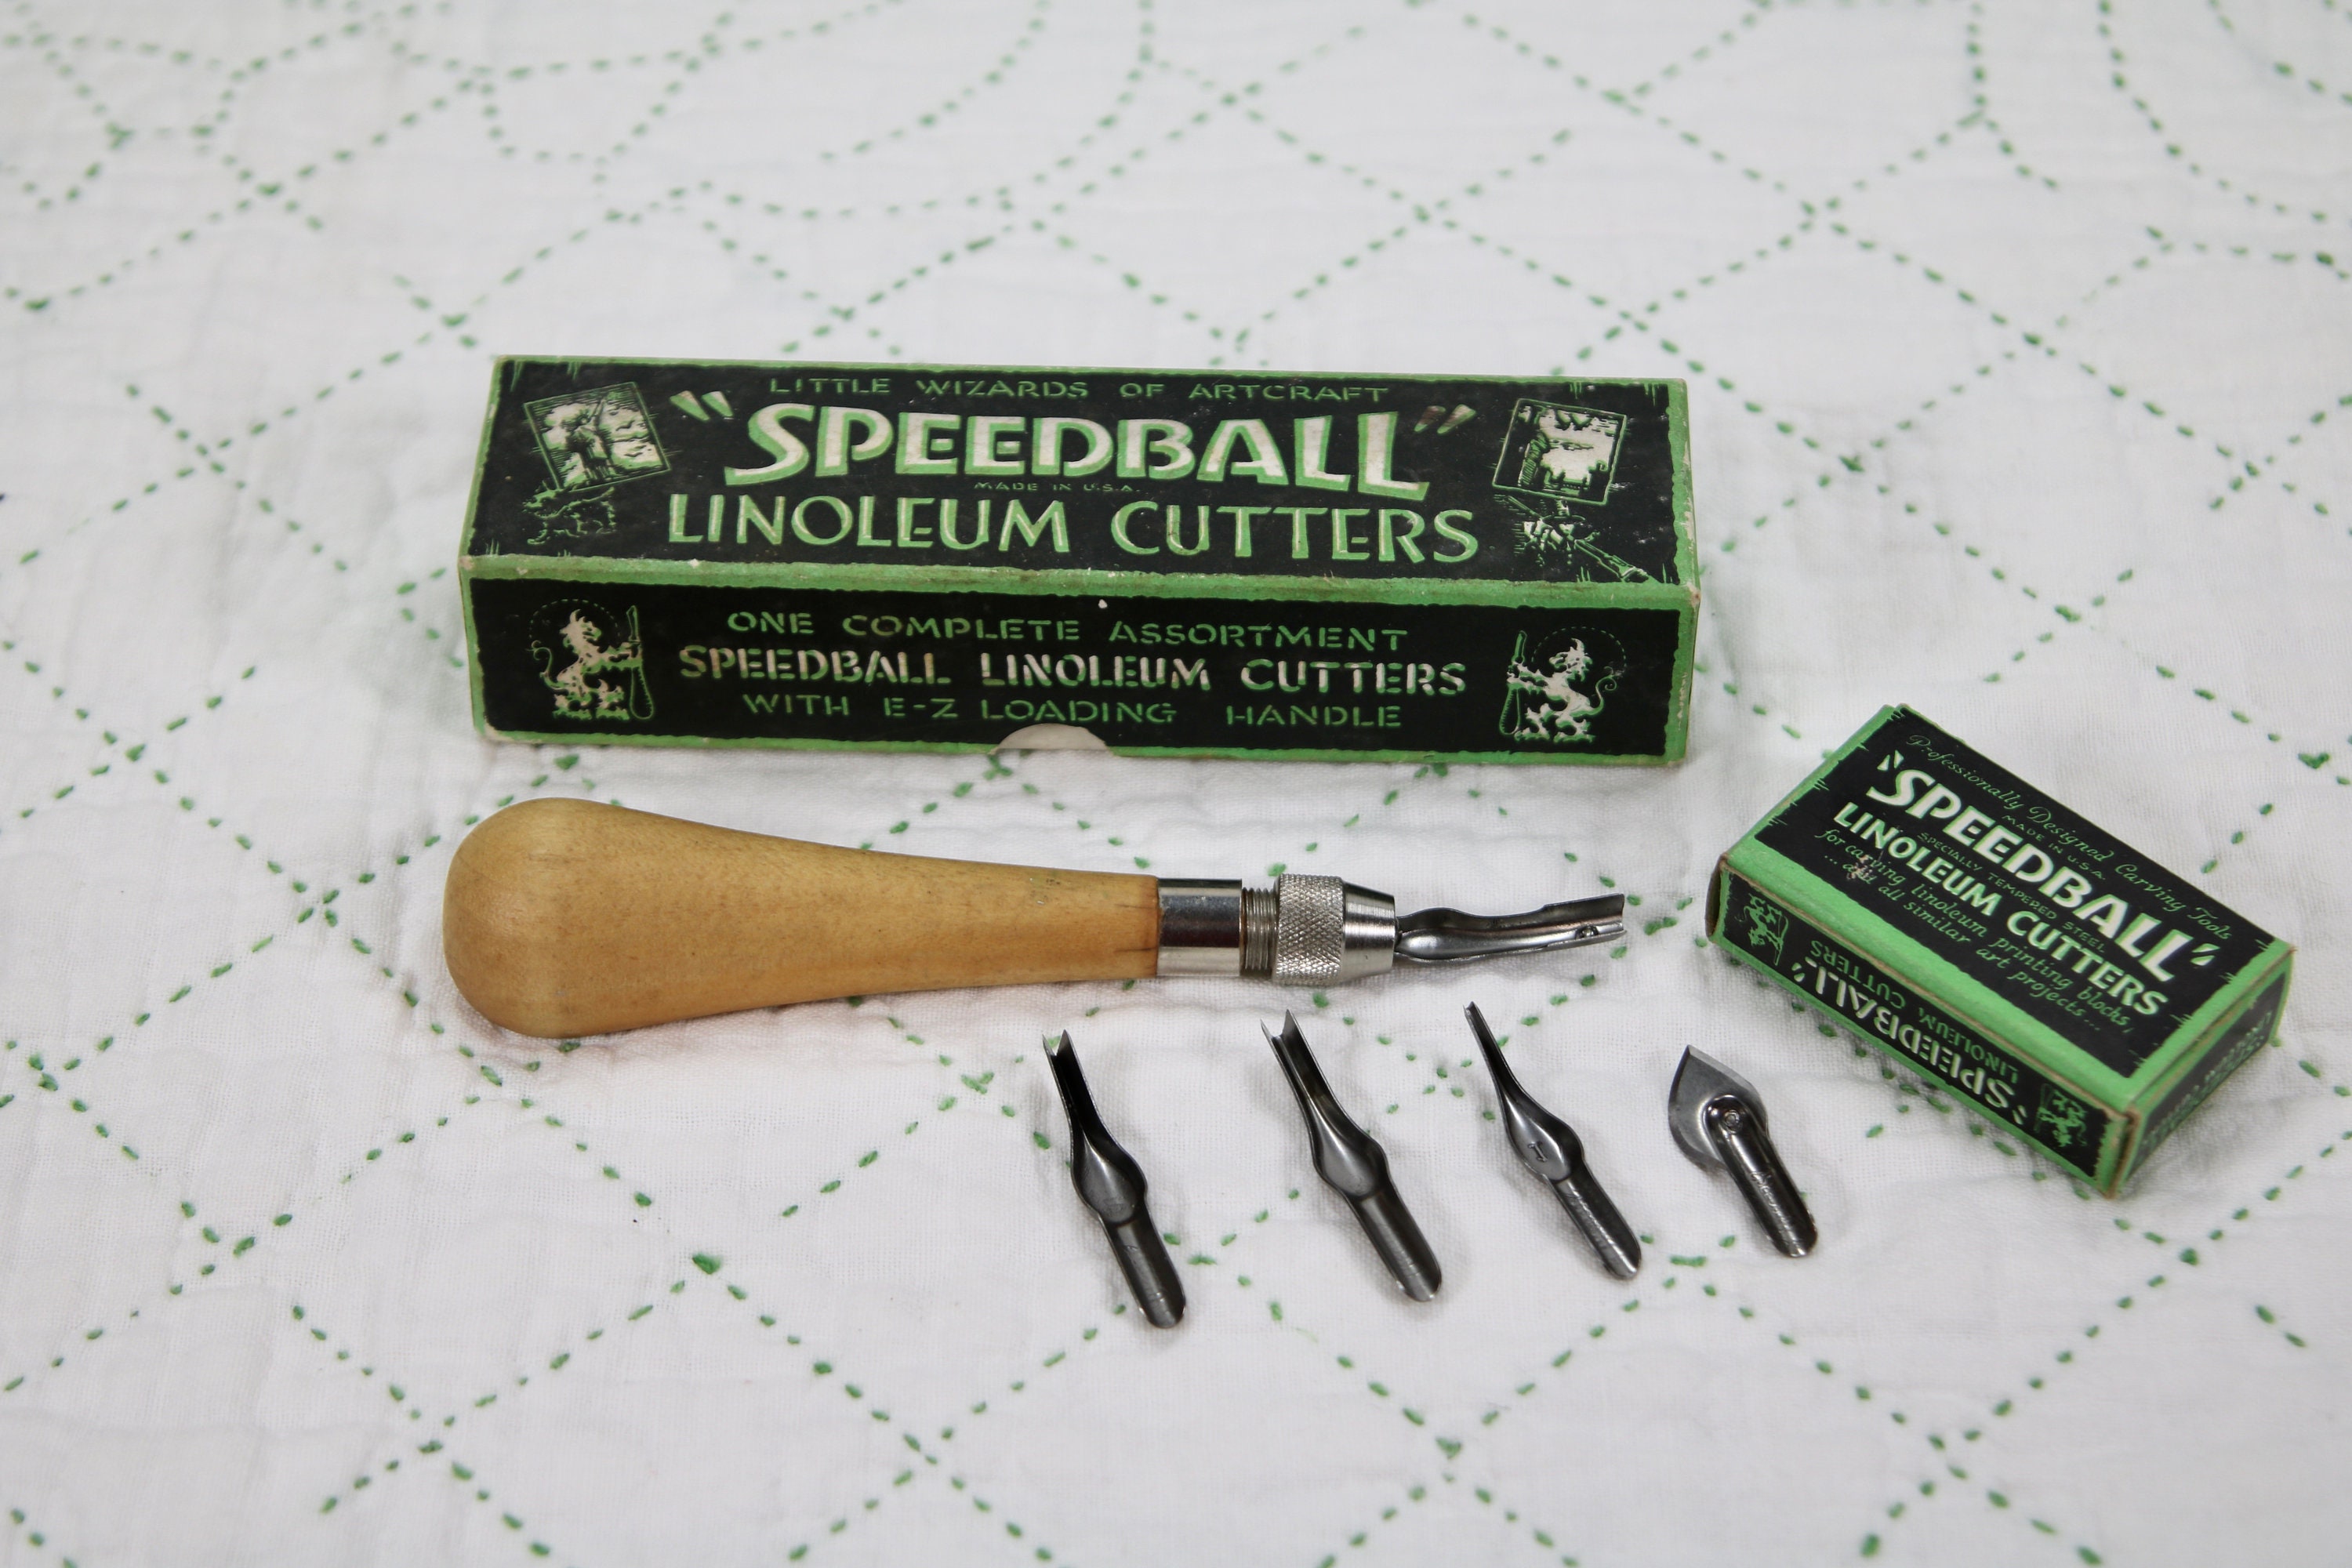 Vintage Speedball Linoleum Cutters With Handle, Made in USA 